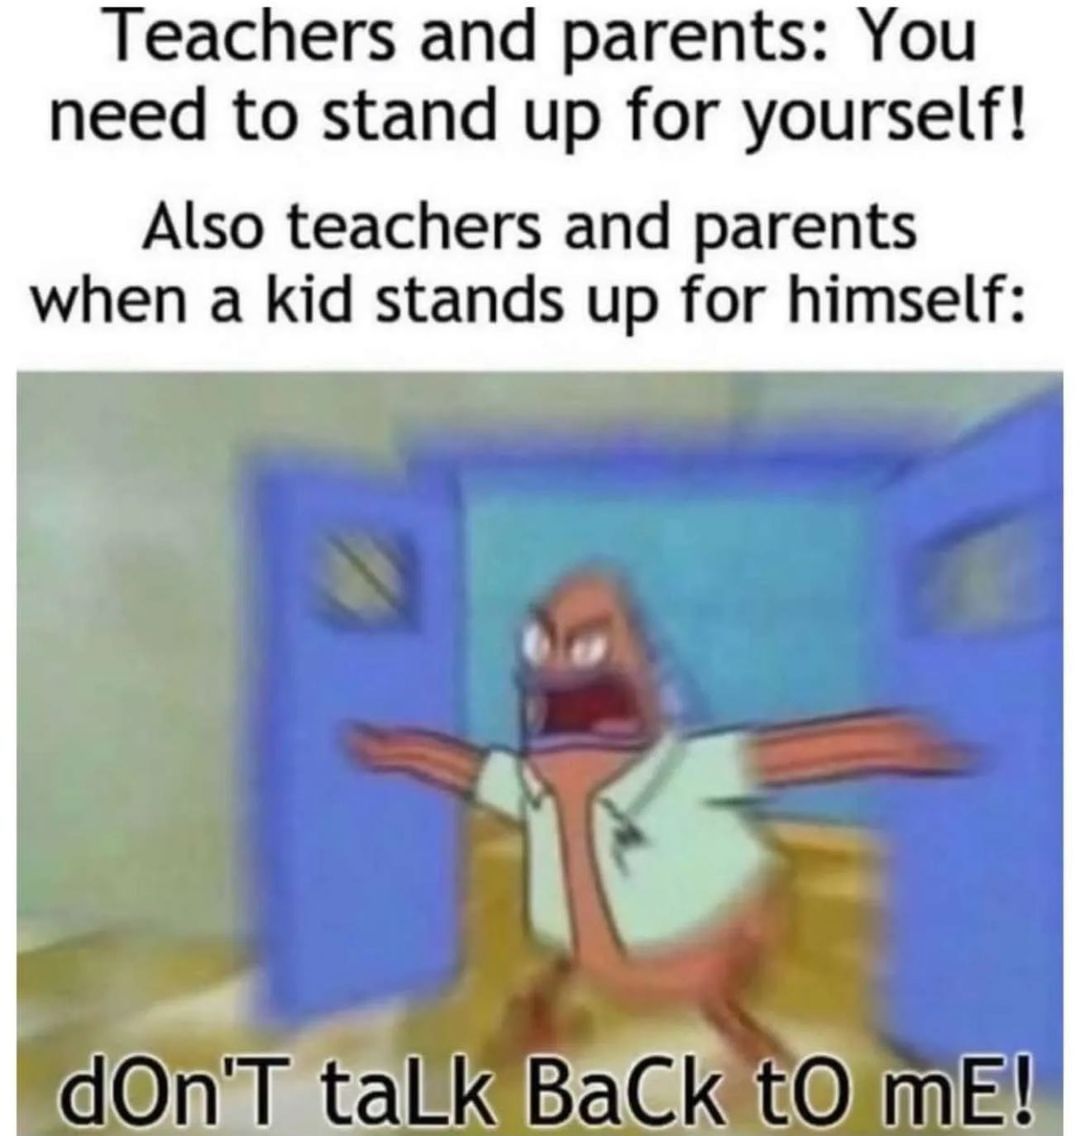 Teachers and parents: You need to stand up for yourself! Also teachers and parents when a kid stands up for himself: dOn'T taLK BaCk to mE!